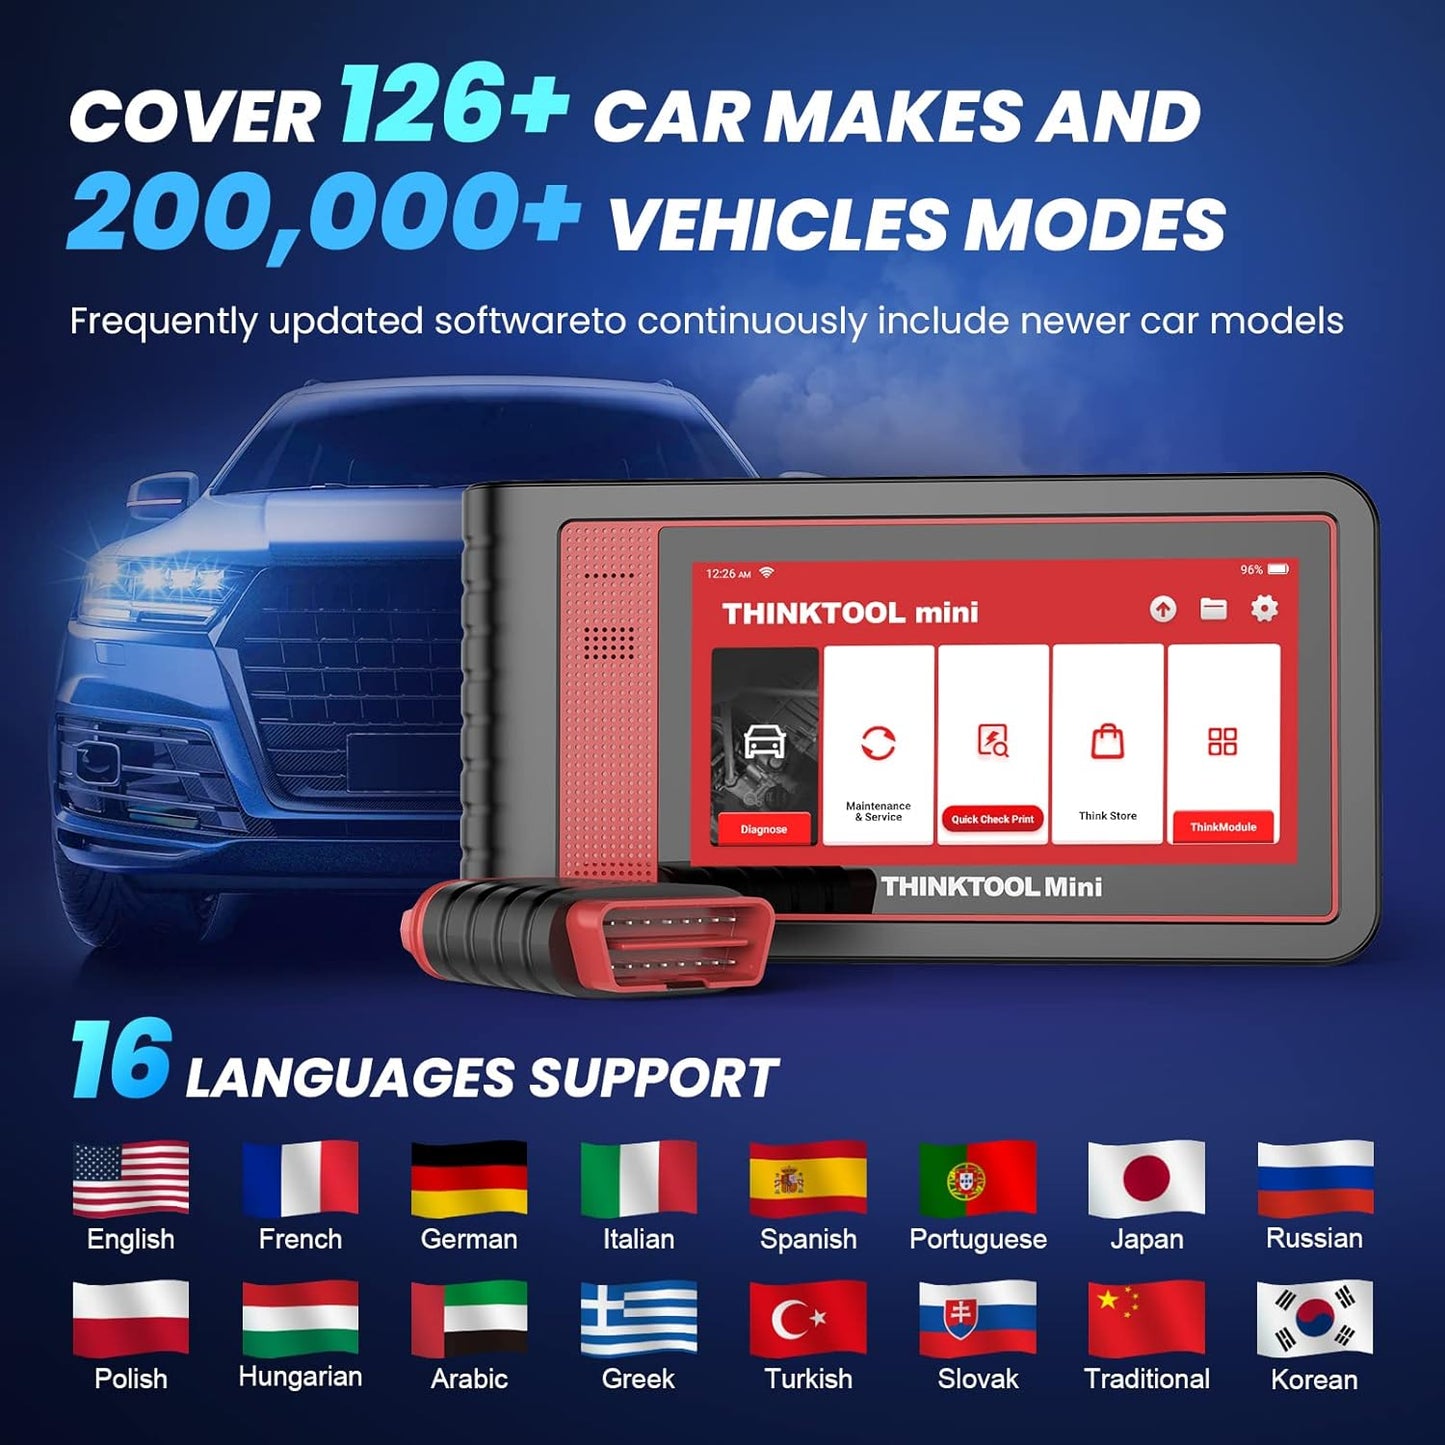 Thinktool Mini 2 All System Diagnostic Tool 28 Services, Bi-Directional Scan Tool Diagnostic Scanner ECU Coding/Active Test/Free Lifetime Update, Upgraded of Thinktool Mini/CANFD